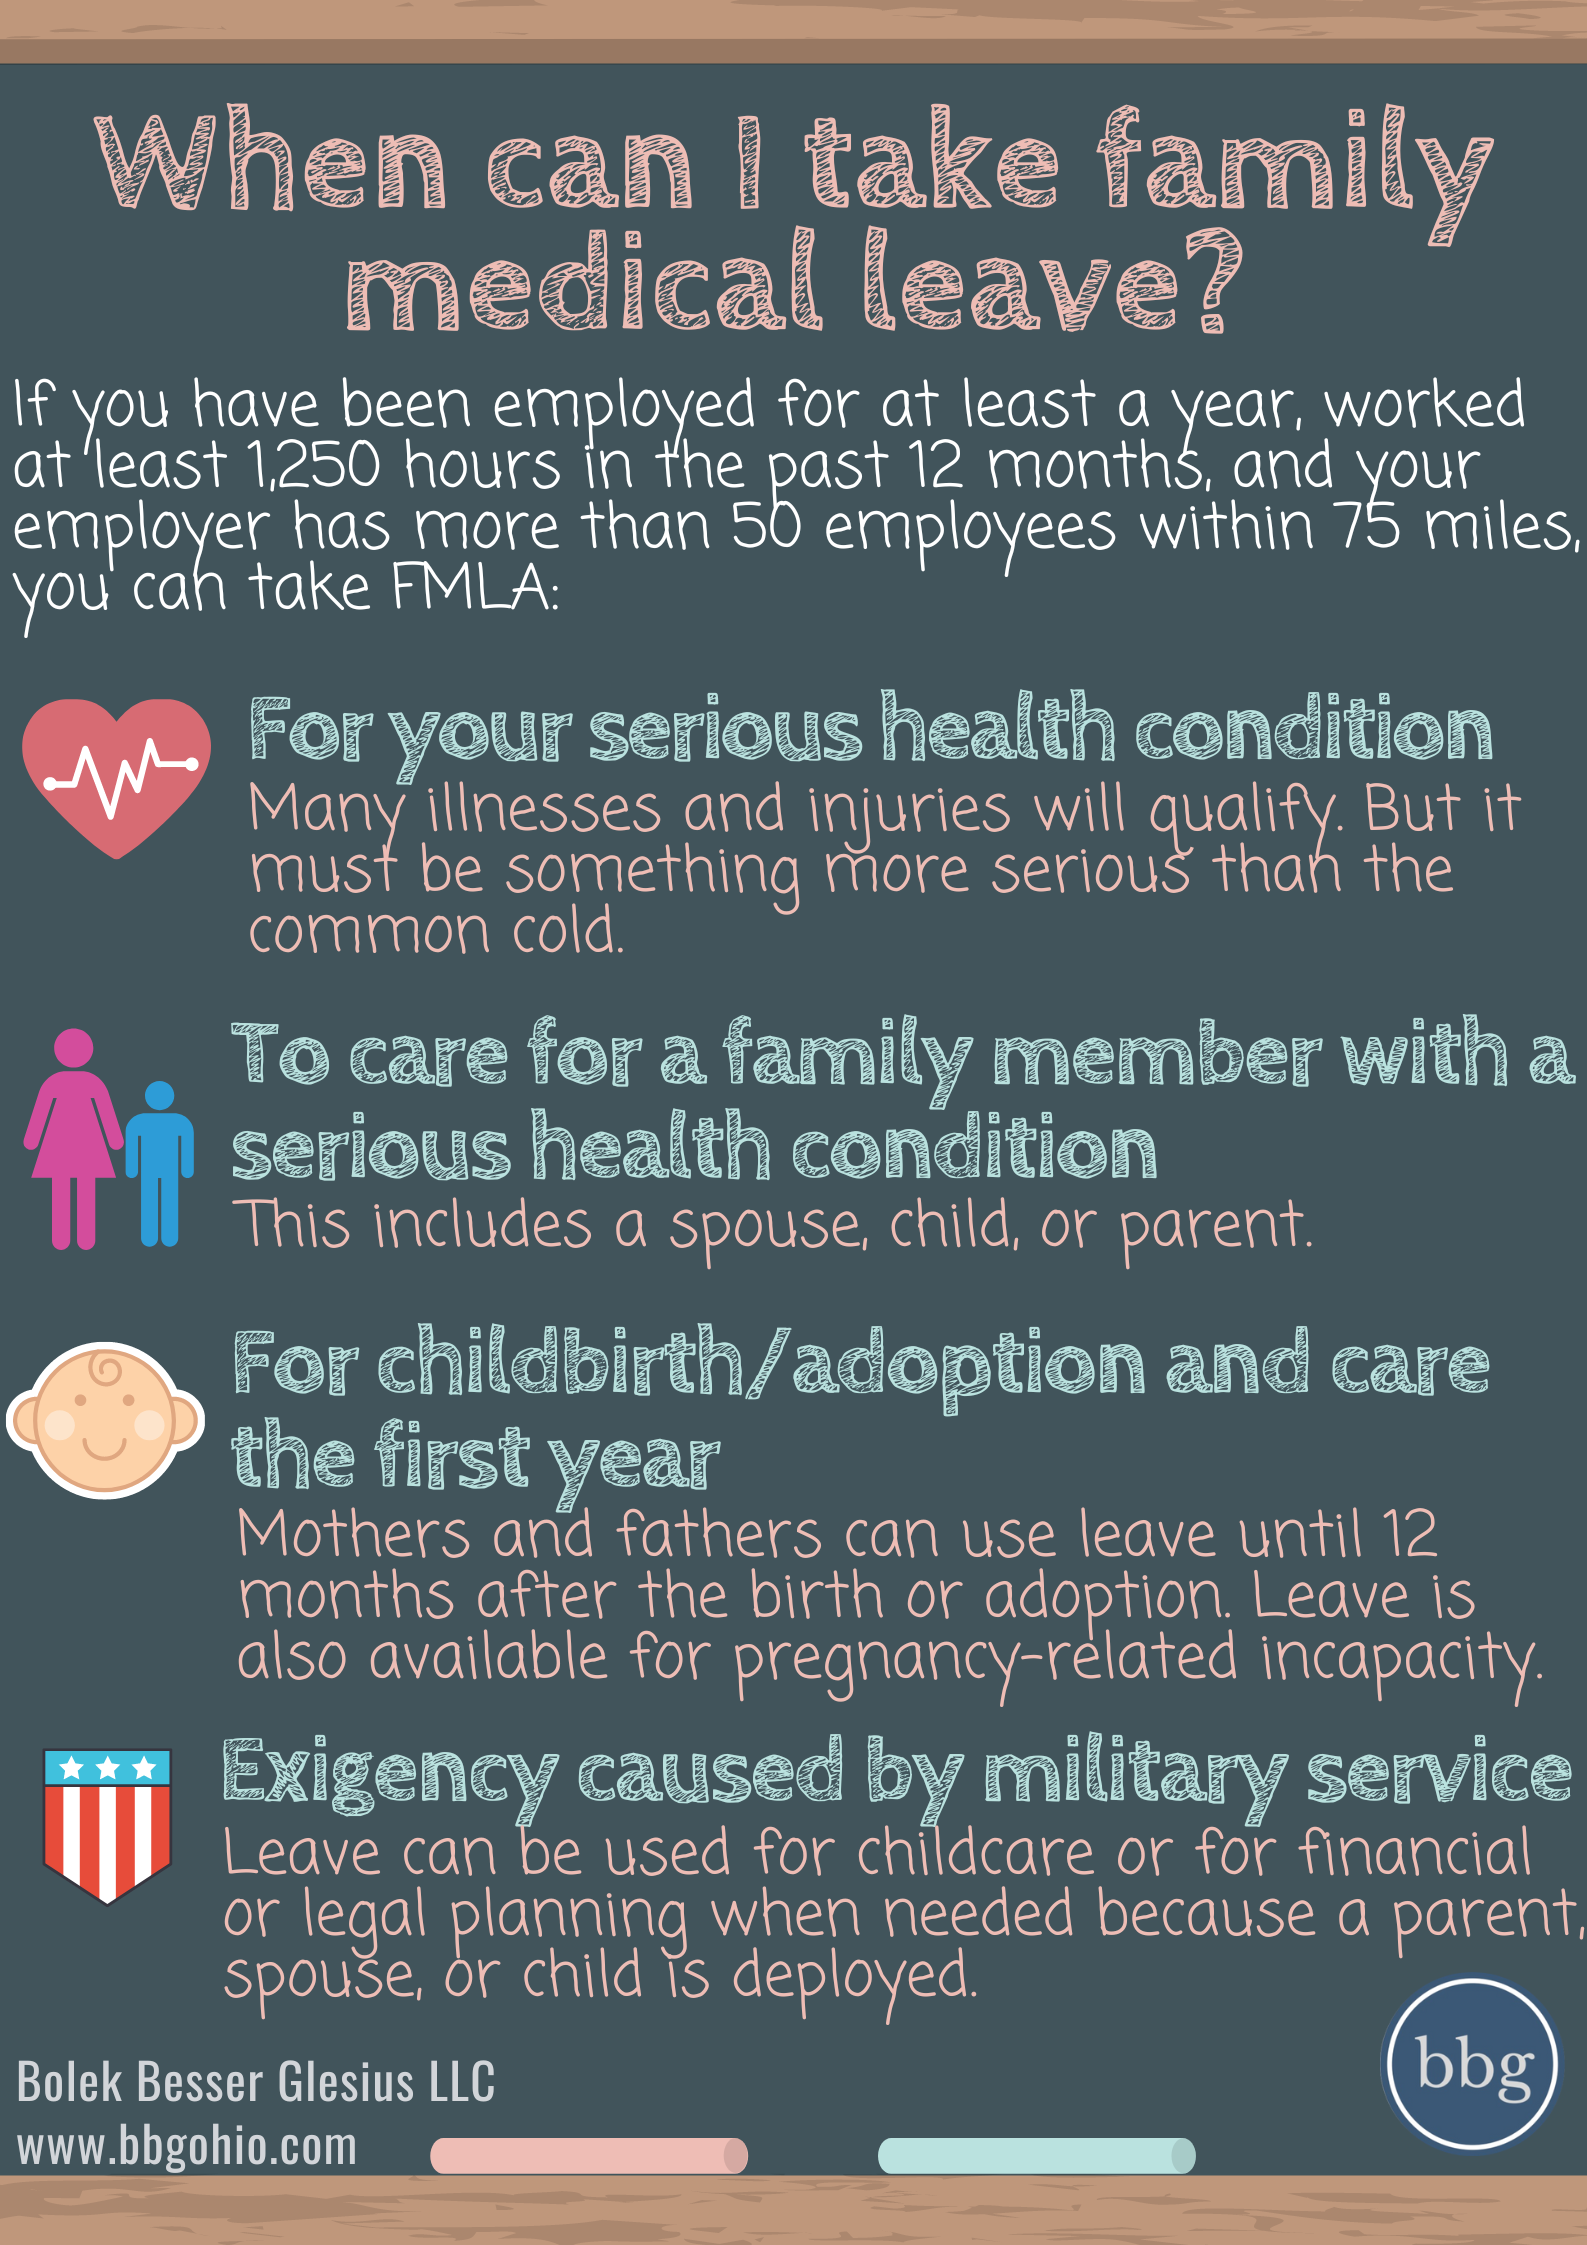 When can I take family medical leave?